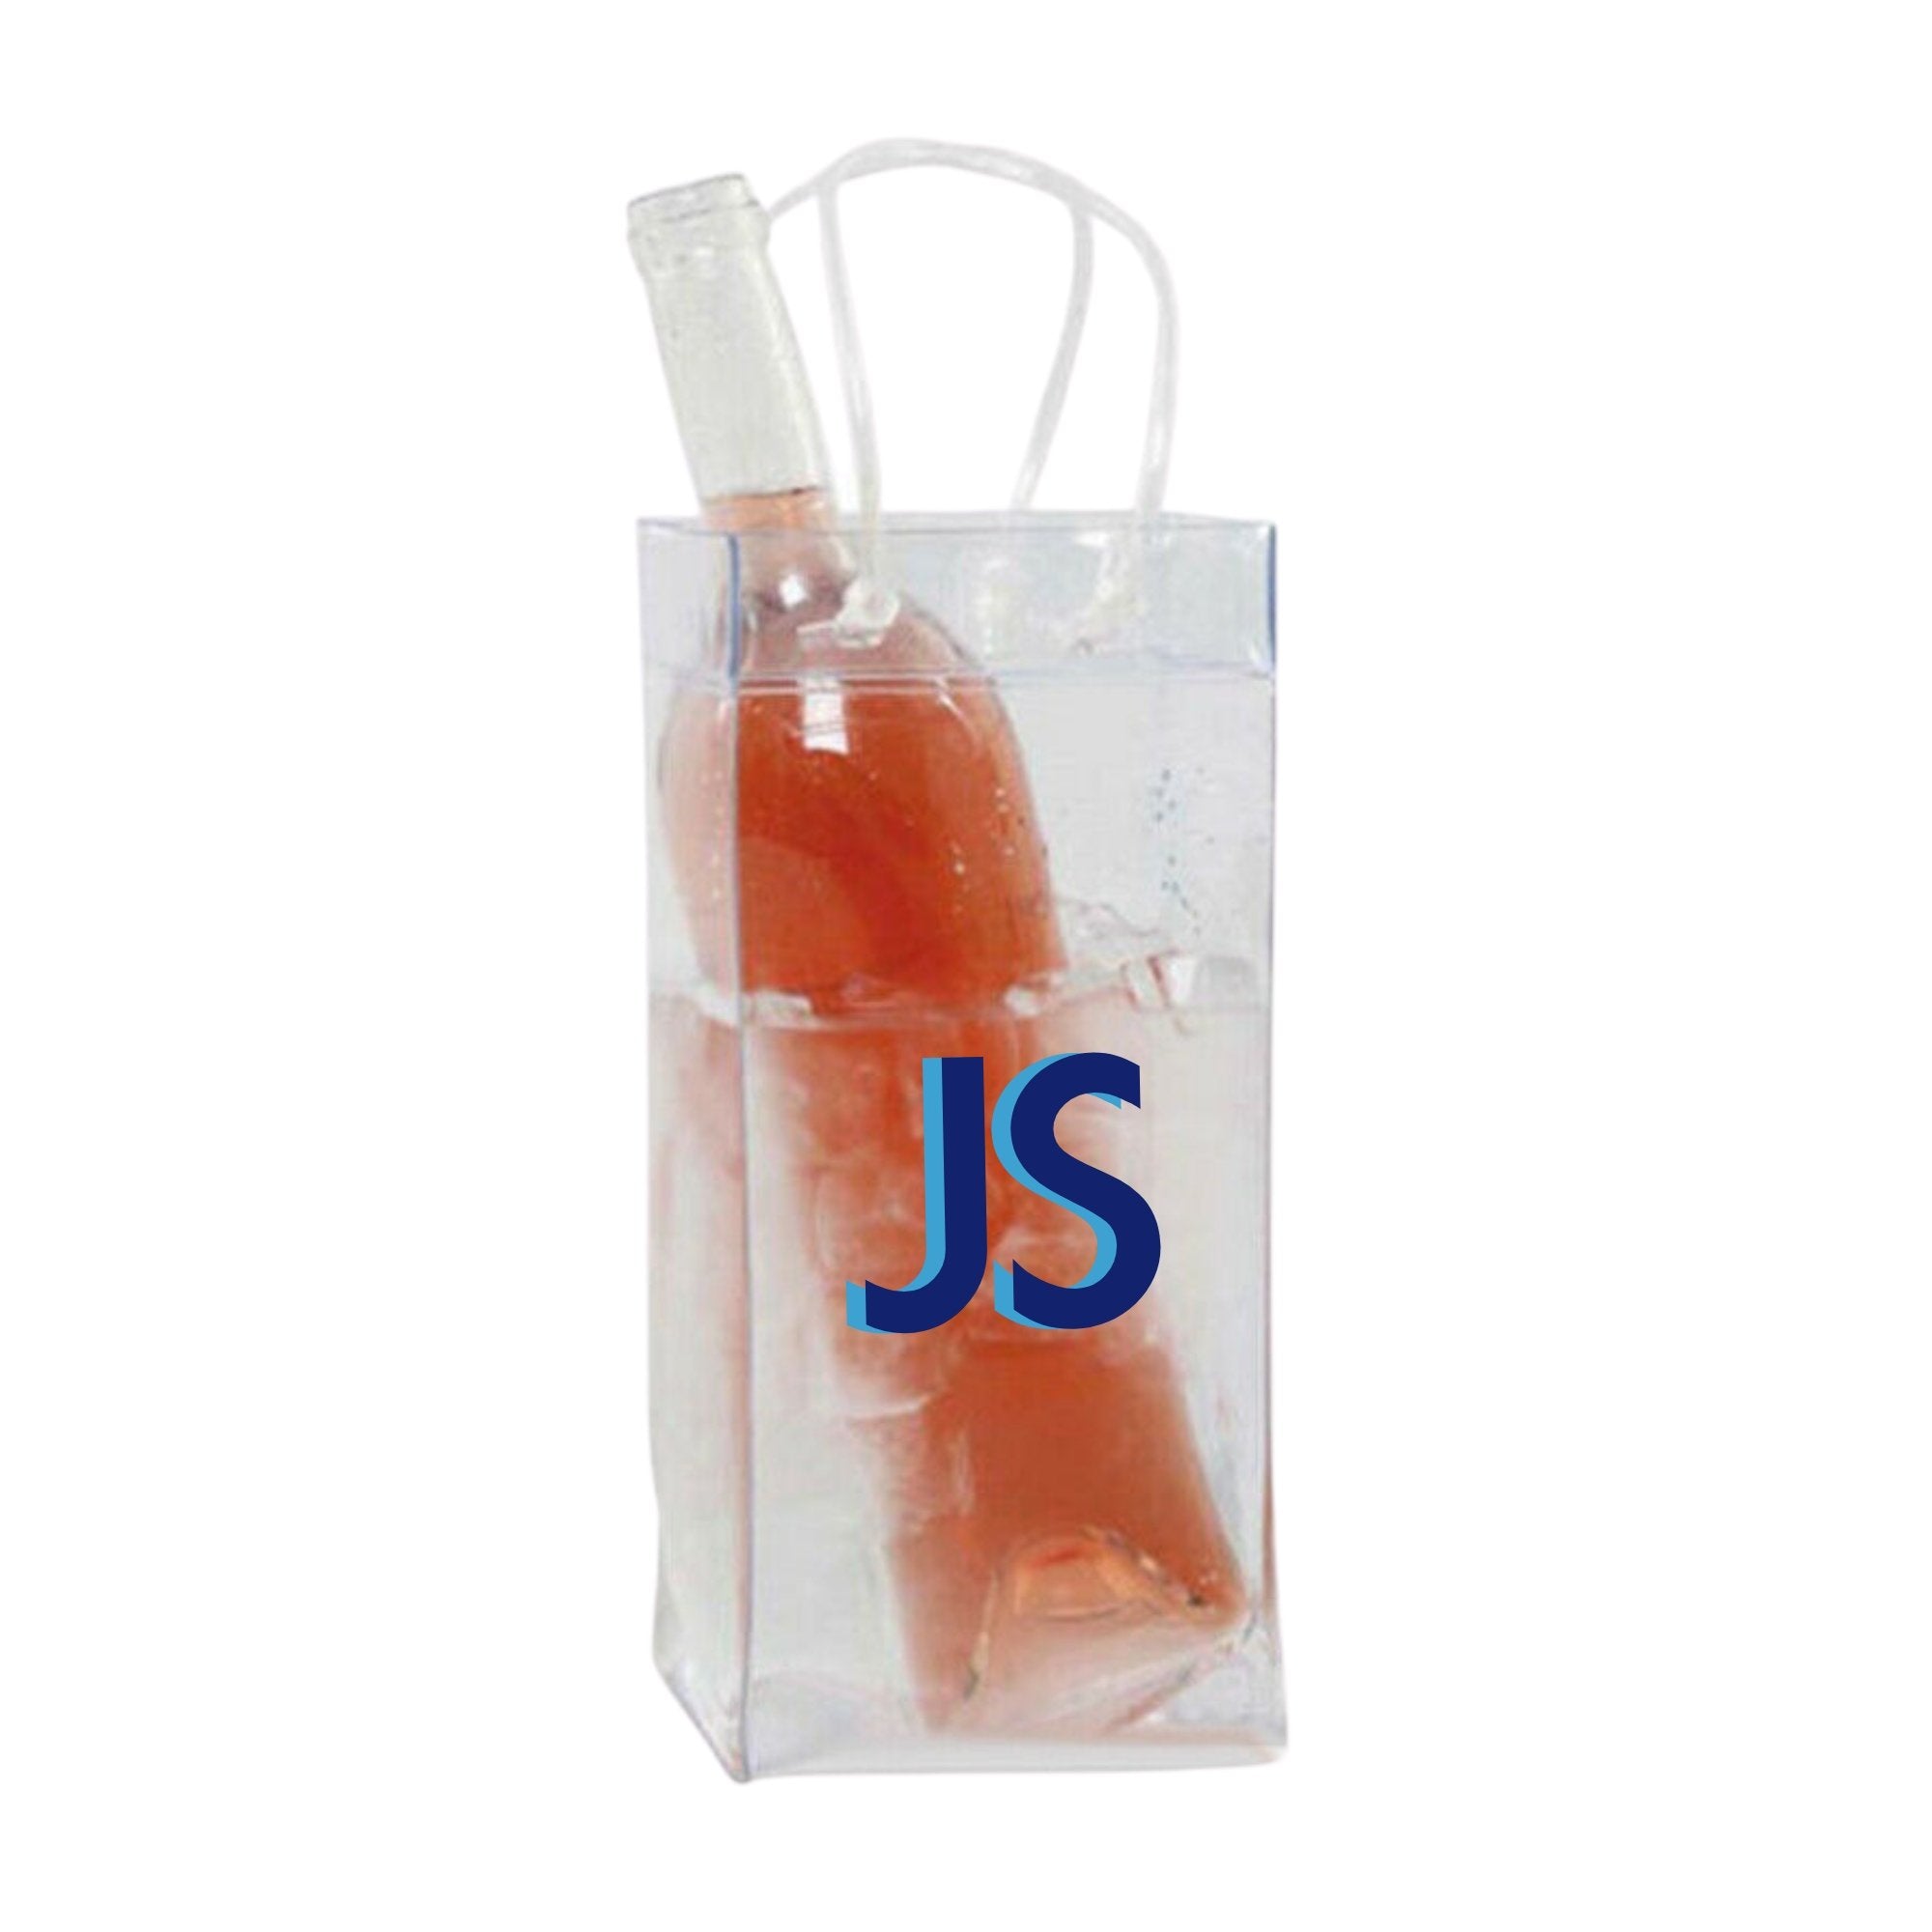 A clear wine bag that is customized with a monogram in blue writing